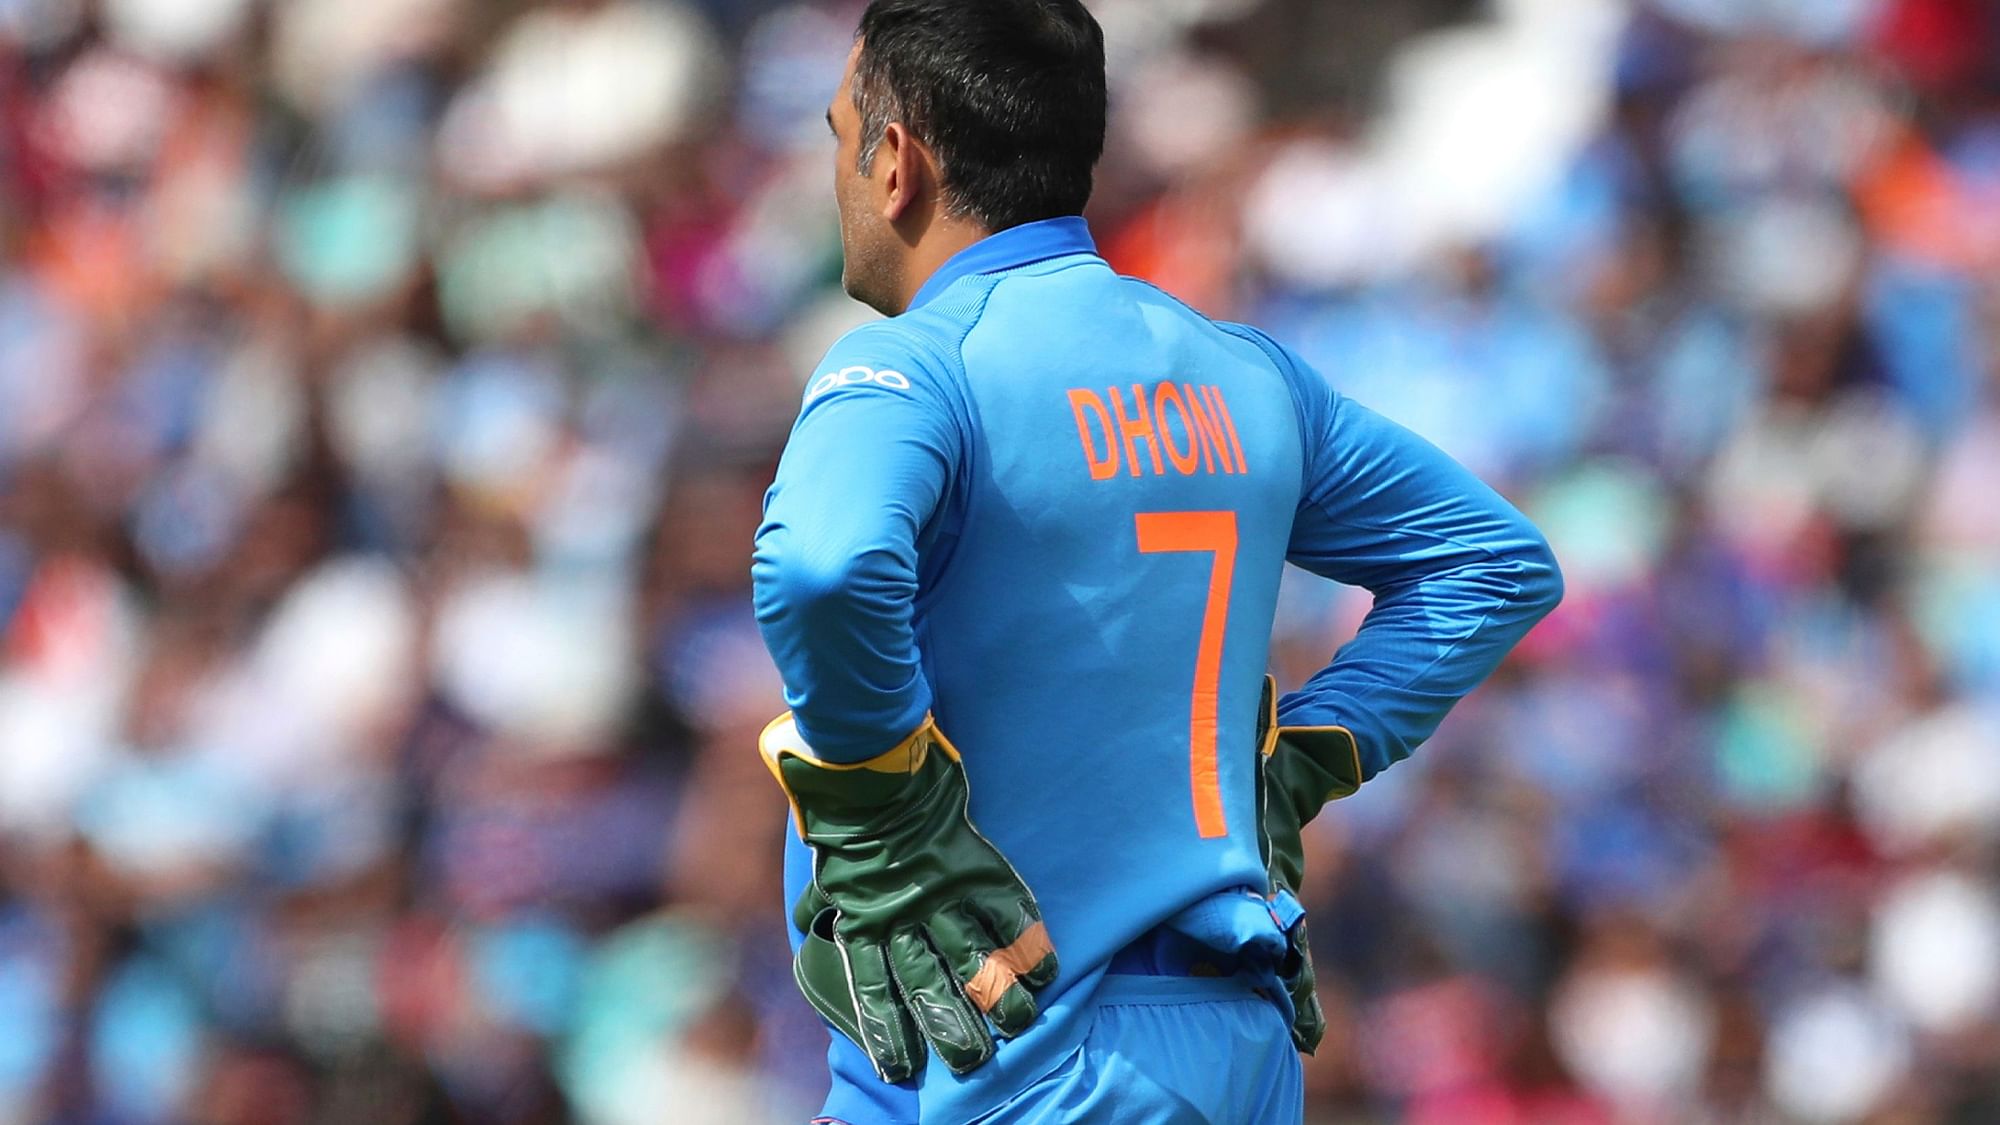 Dhoni was also seen wearing the dagger-free gloves when India came onto the field after they set Australia a target of 353.